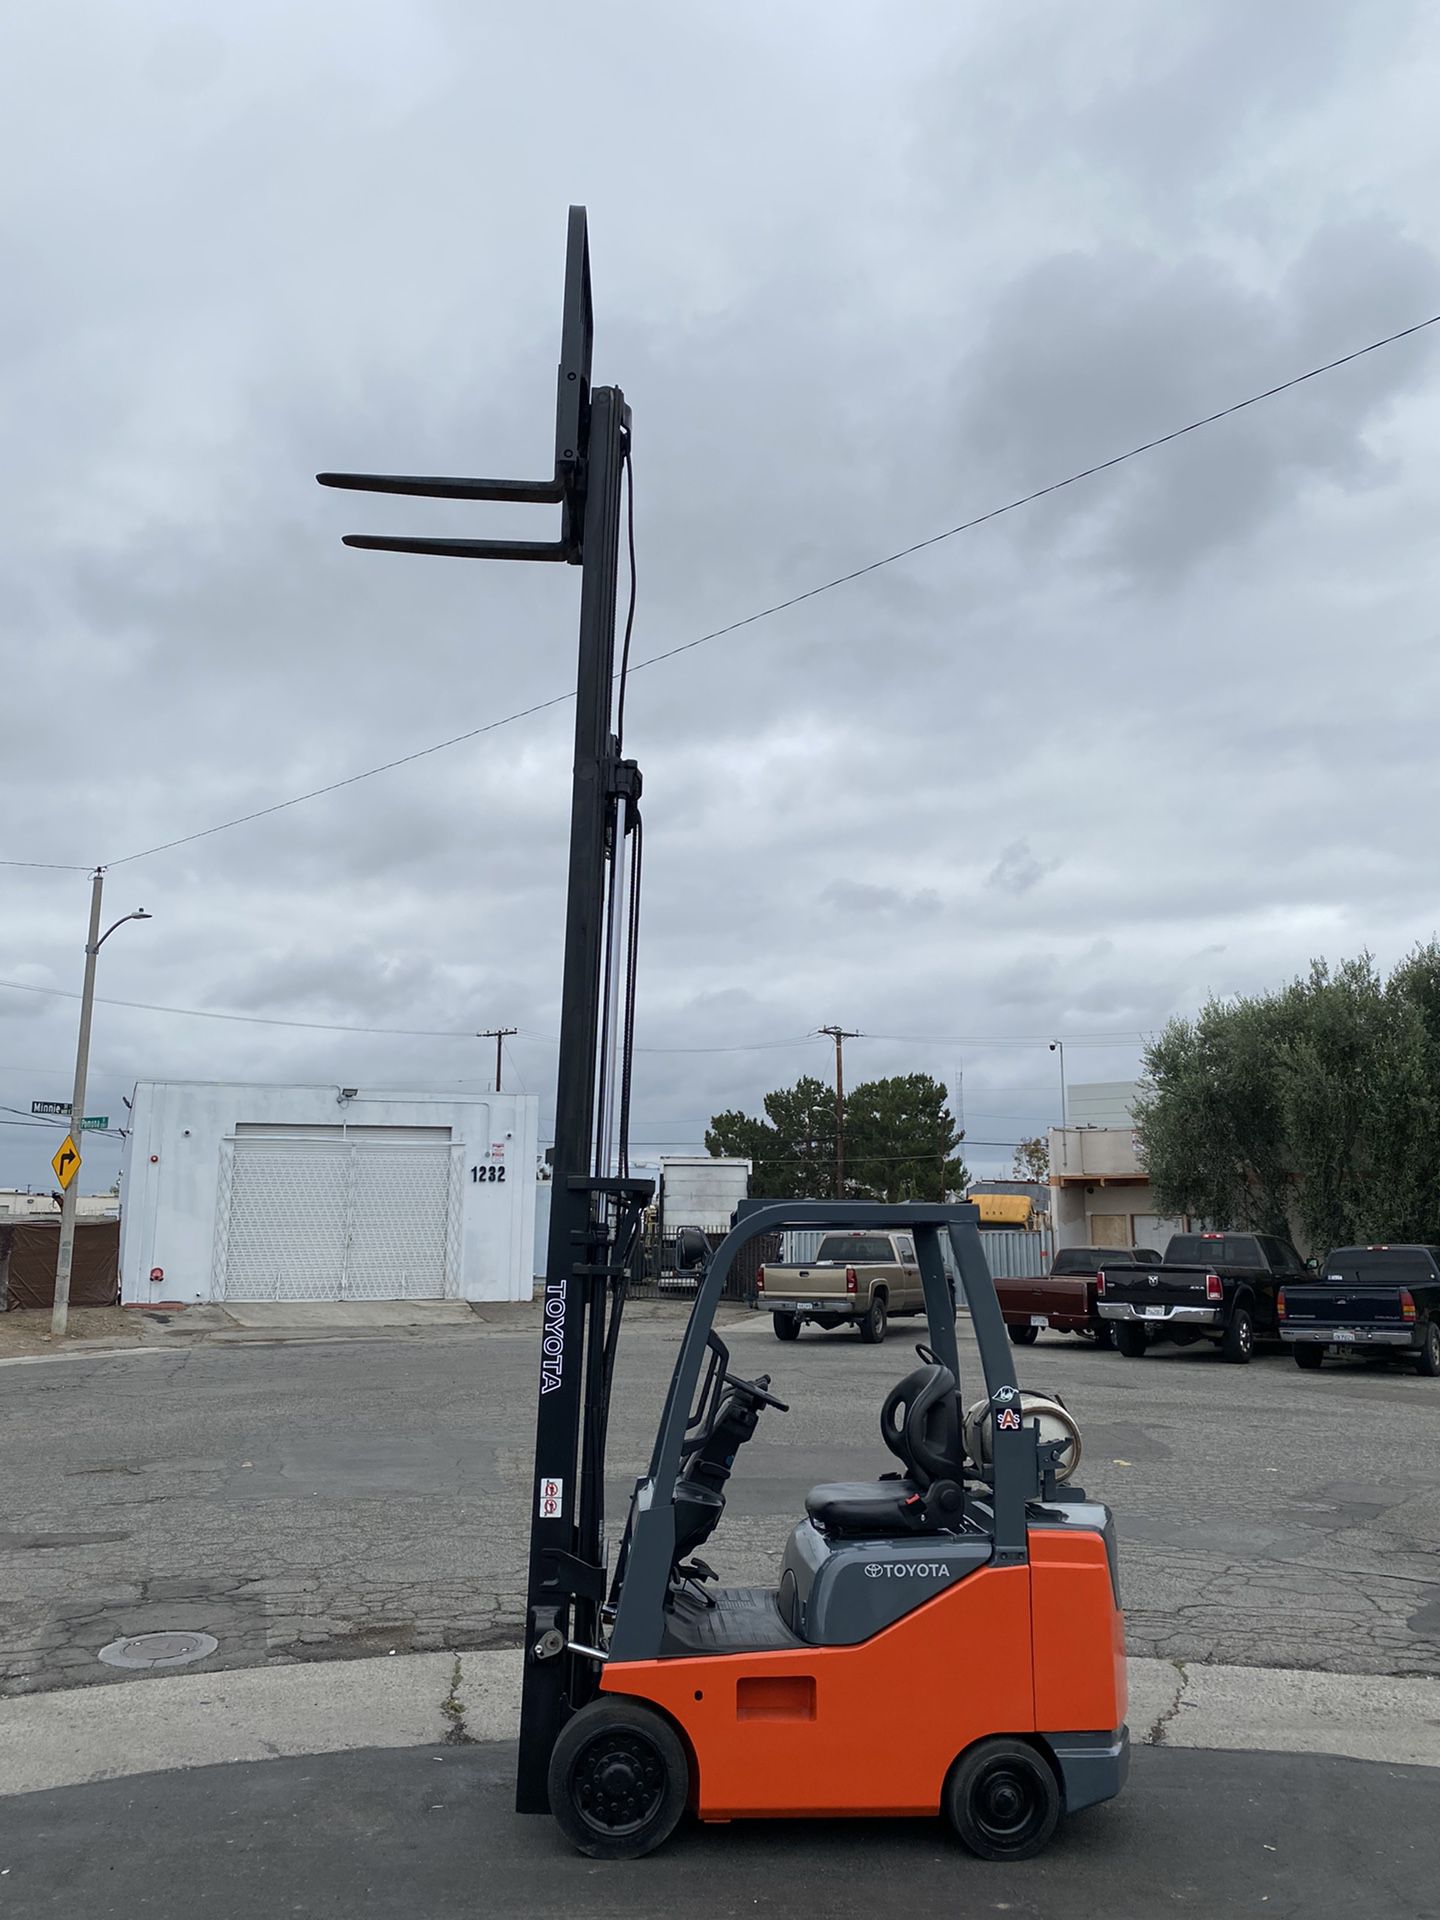 2014 Toyota Forklift 8FGCSU20 4000 LBS SMALL FRAME